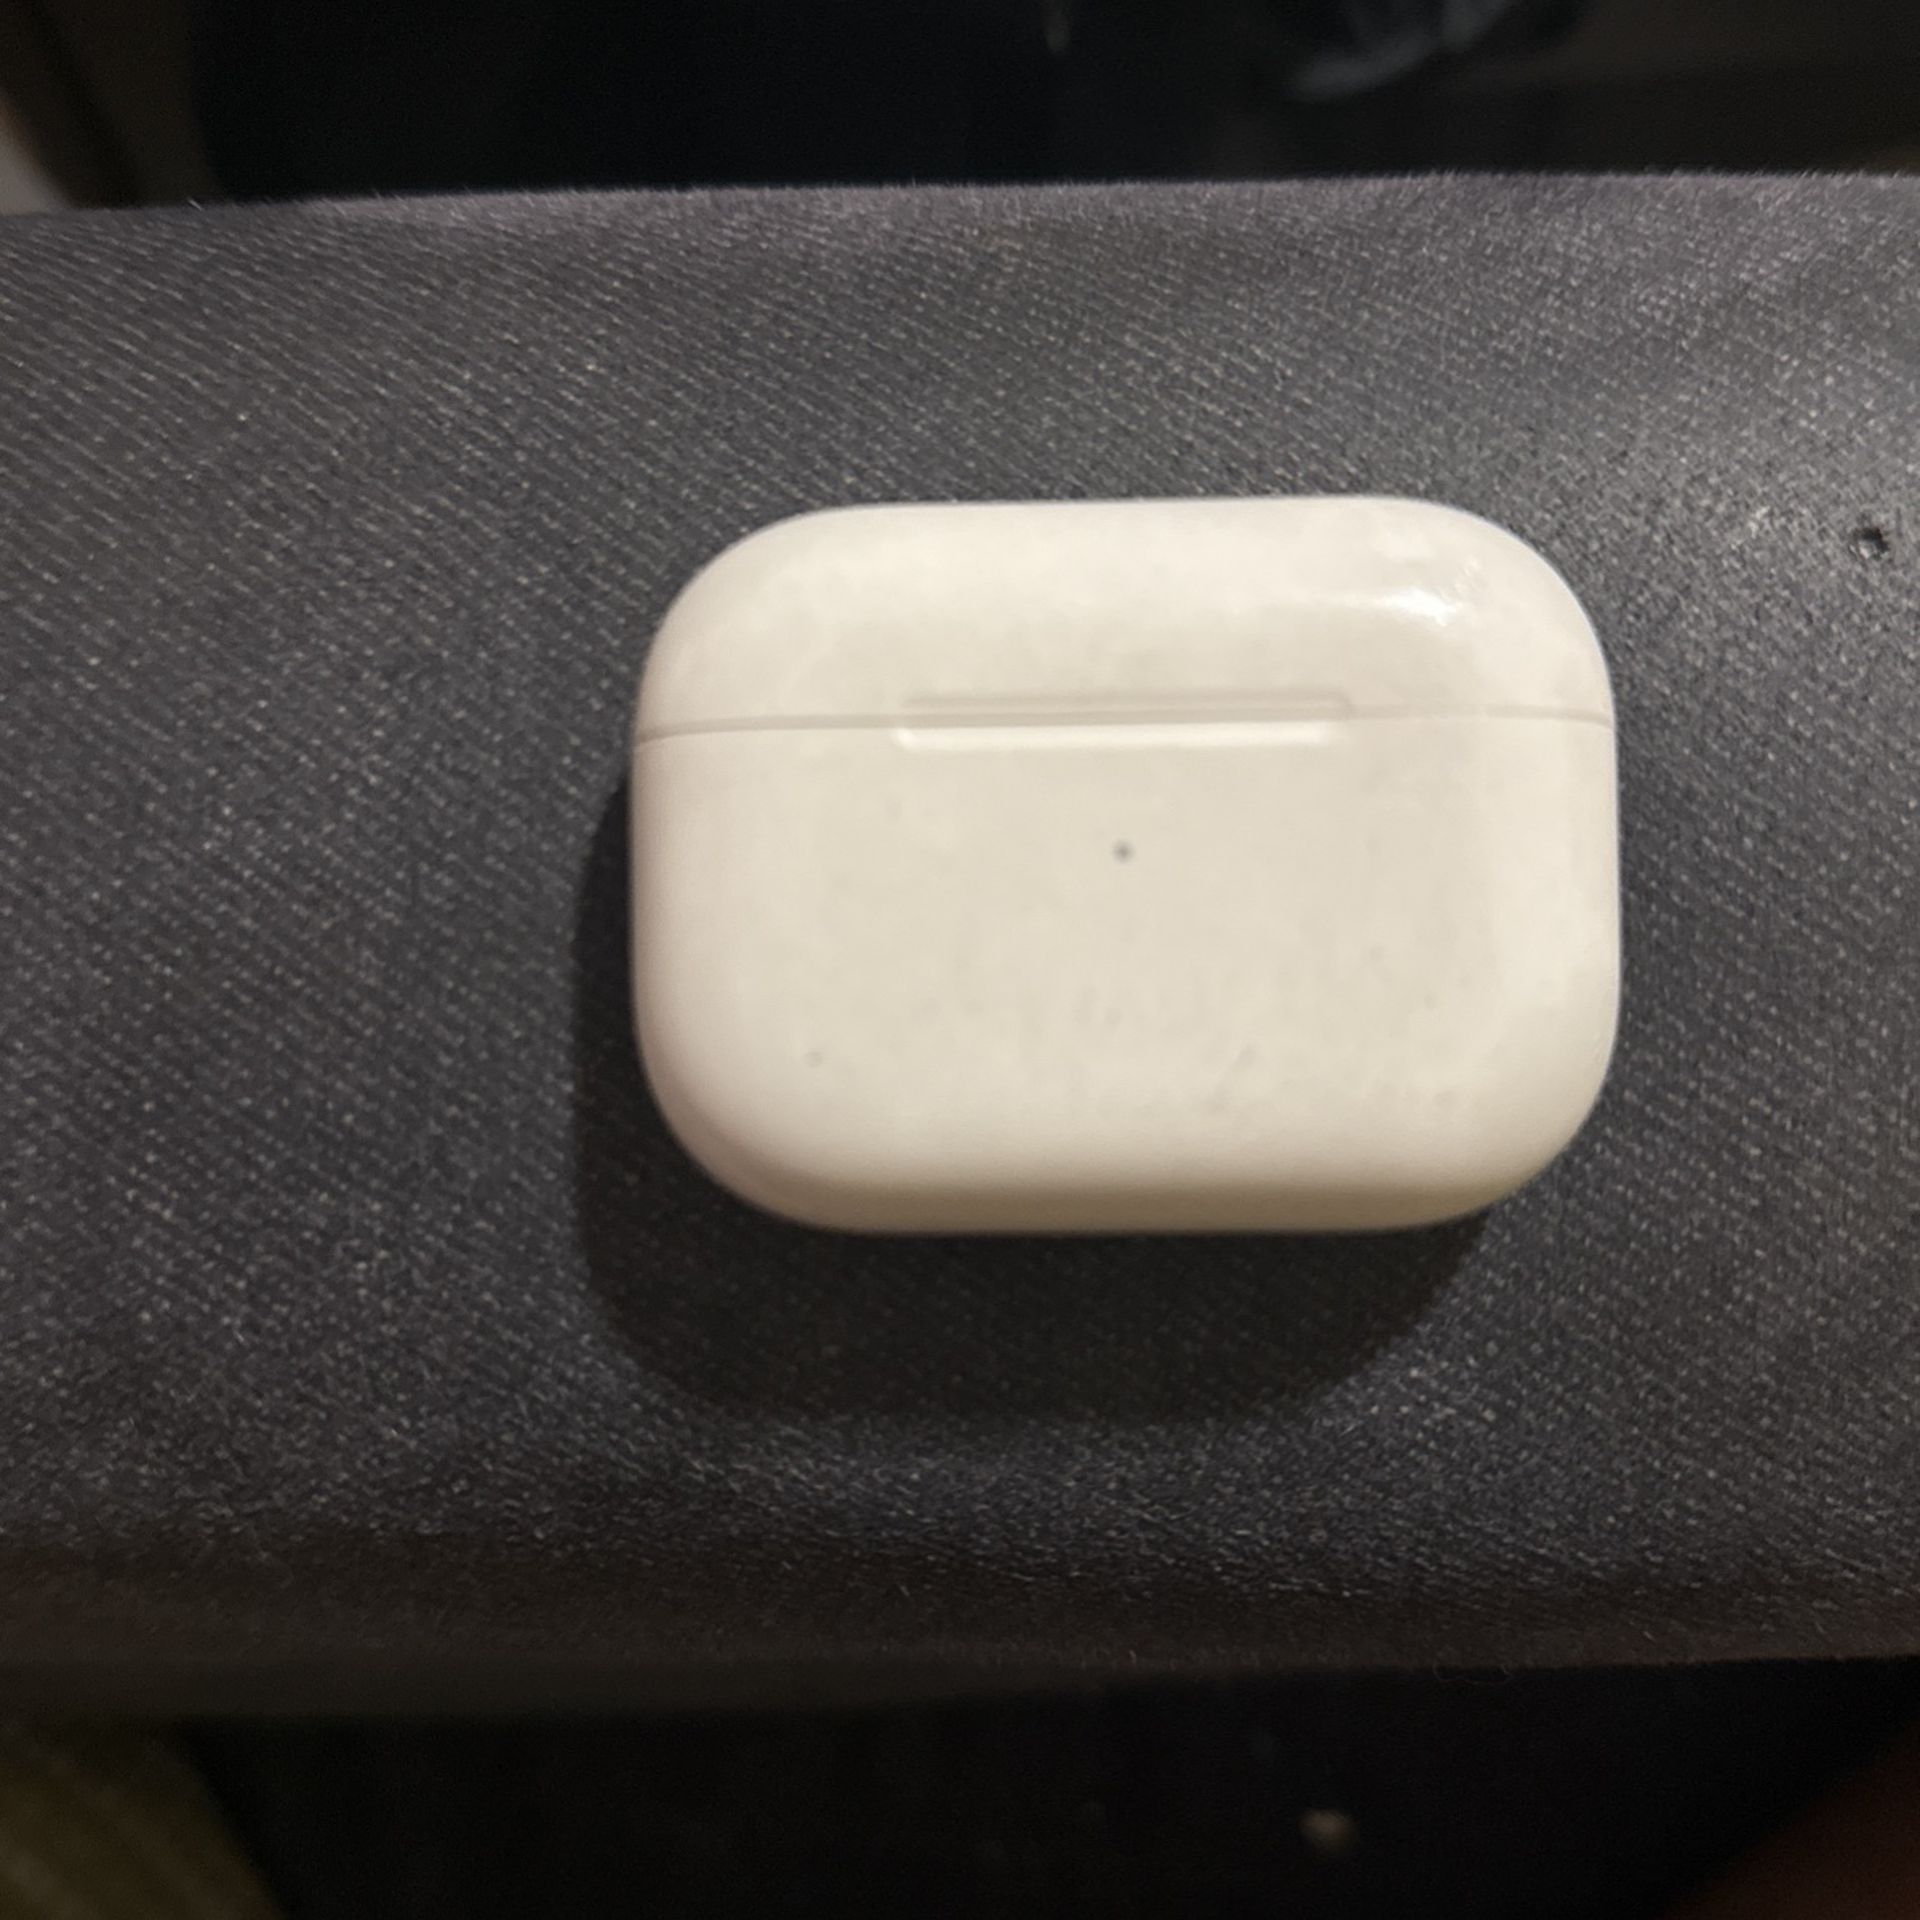 Apple AirPods Case Only